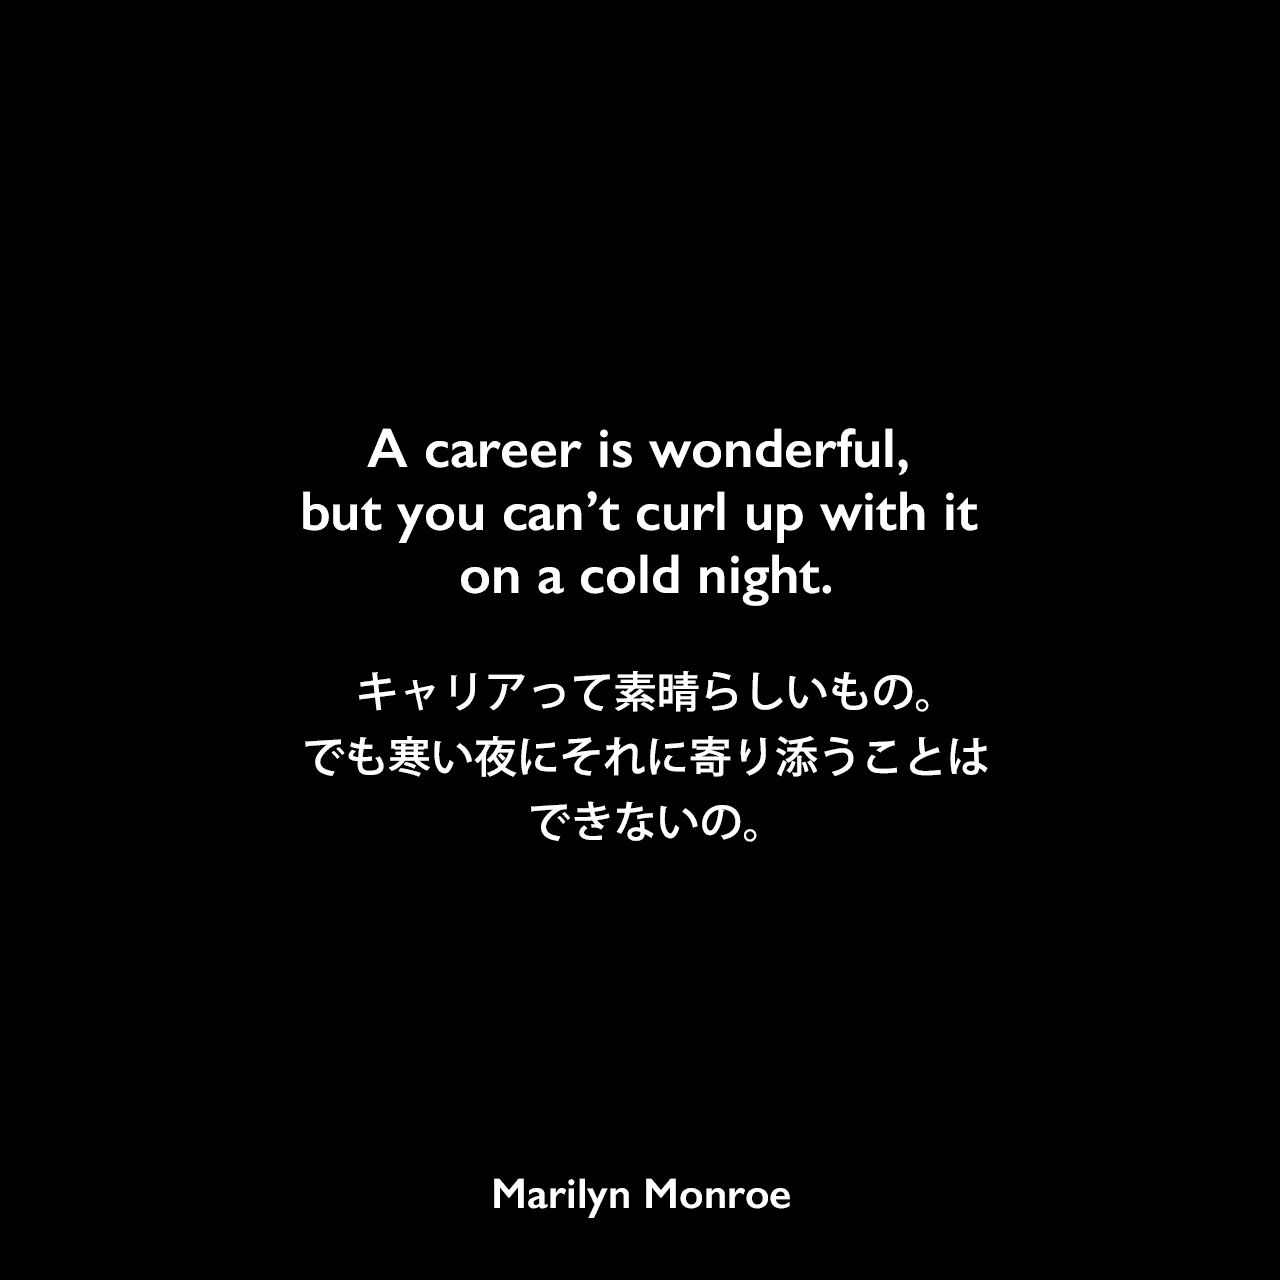 A career is wonderful, but you can’t curl up with it on a cold night.キャリアって素晴らしいもの。でも寒い夜にそれに寄り添うことはできないの。Marilyn Monroe